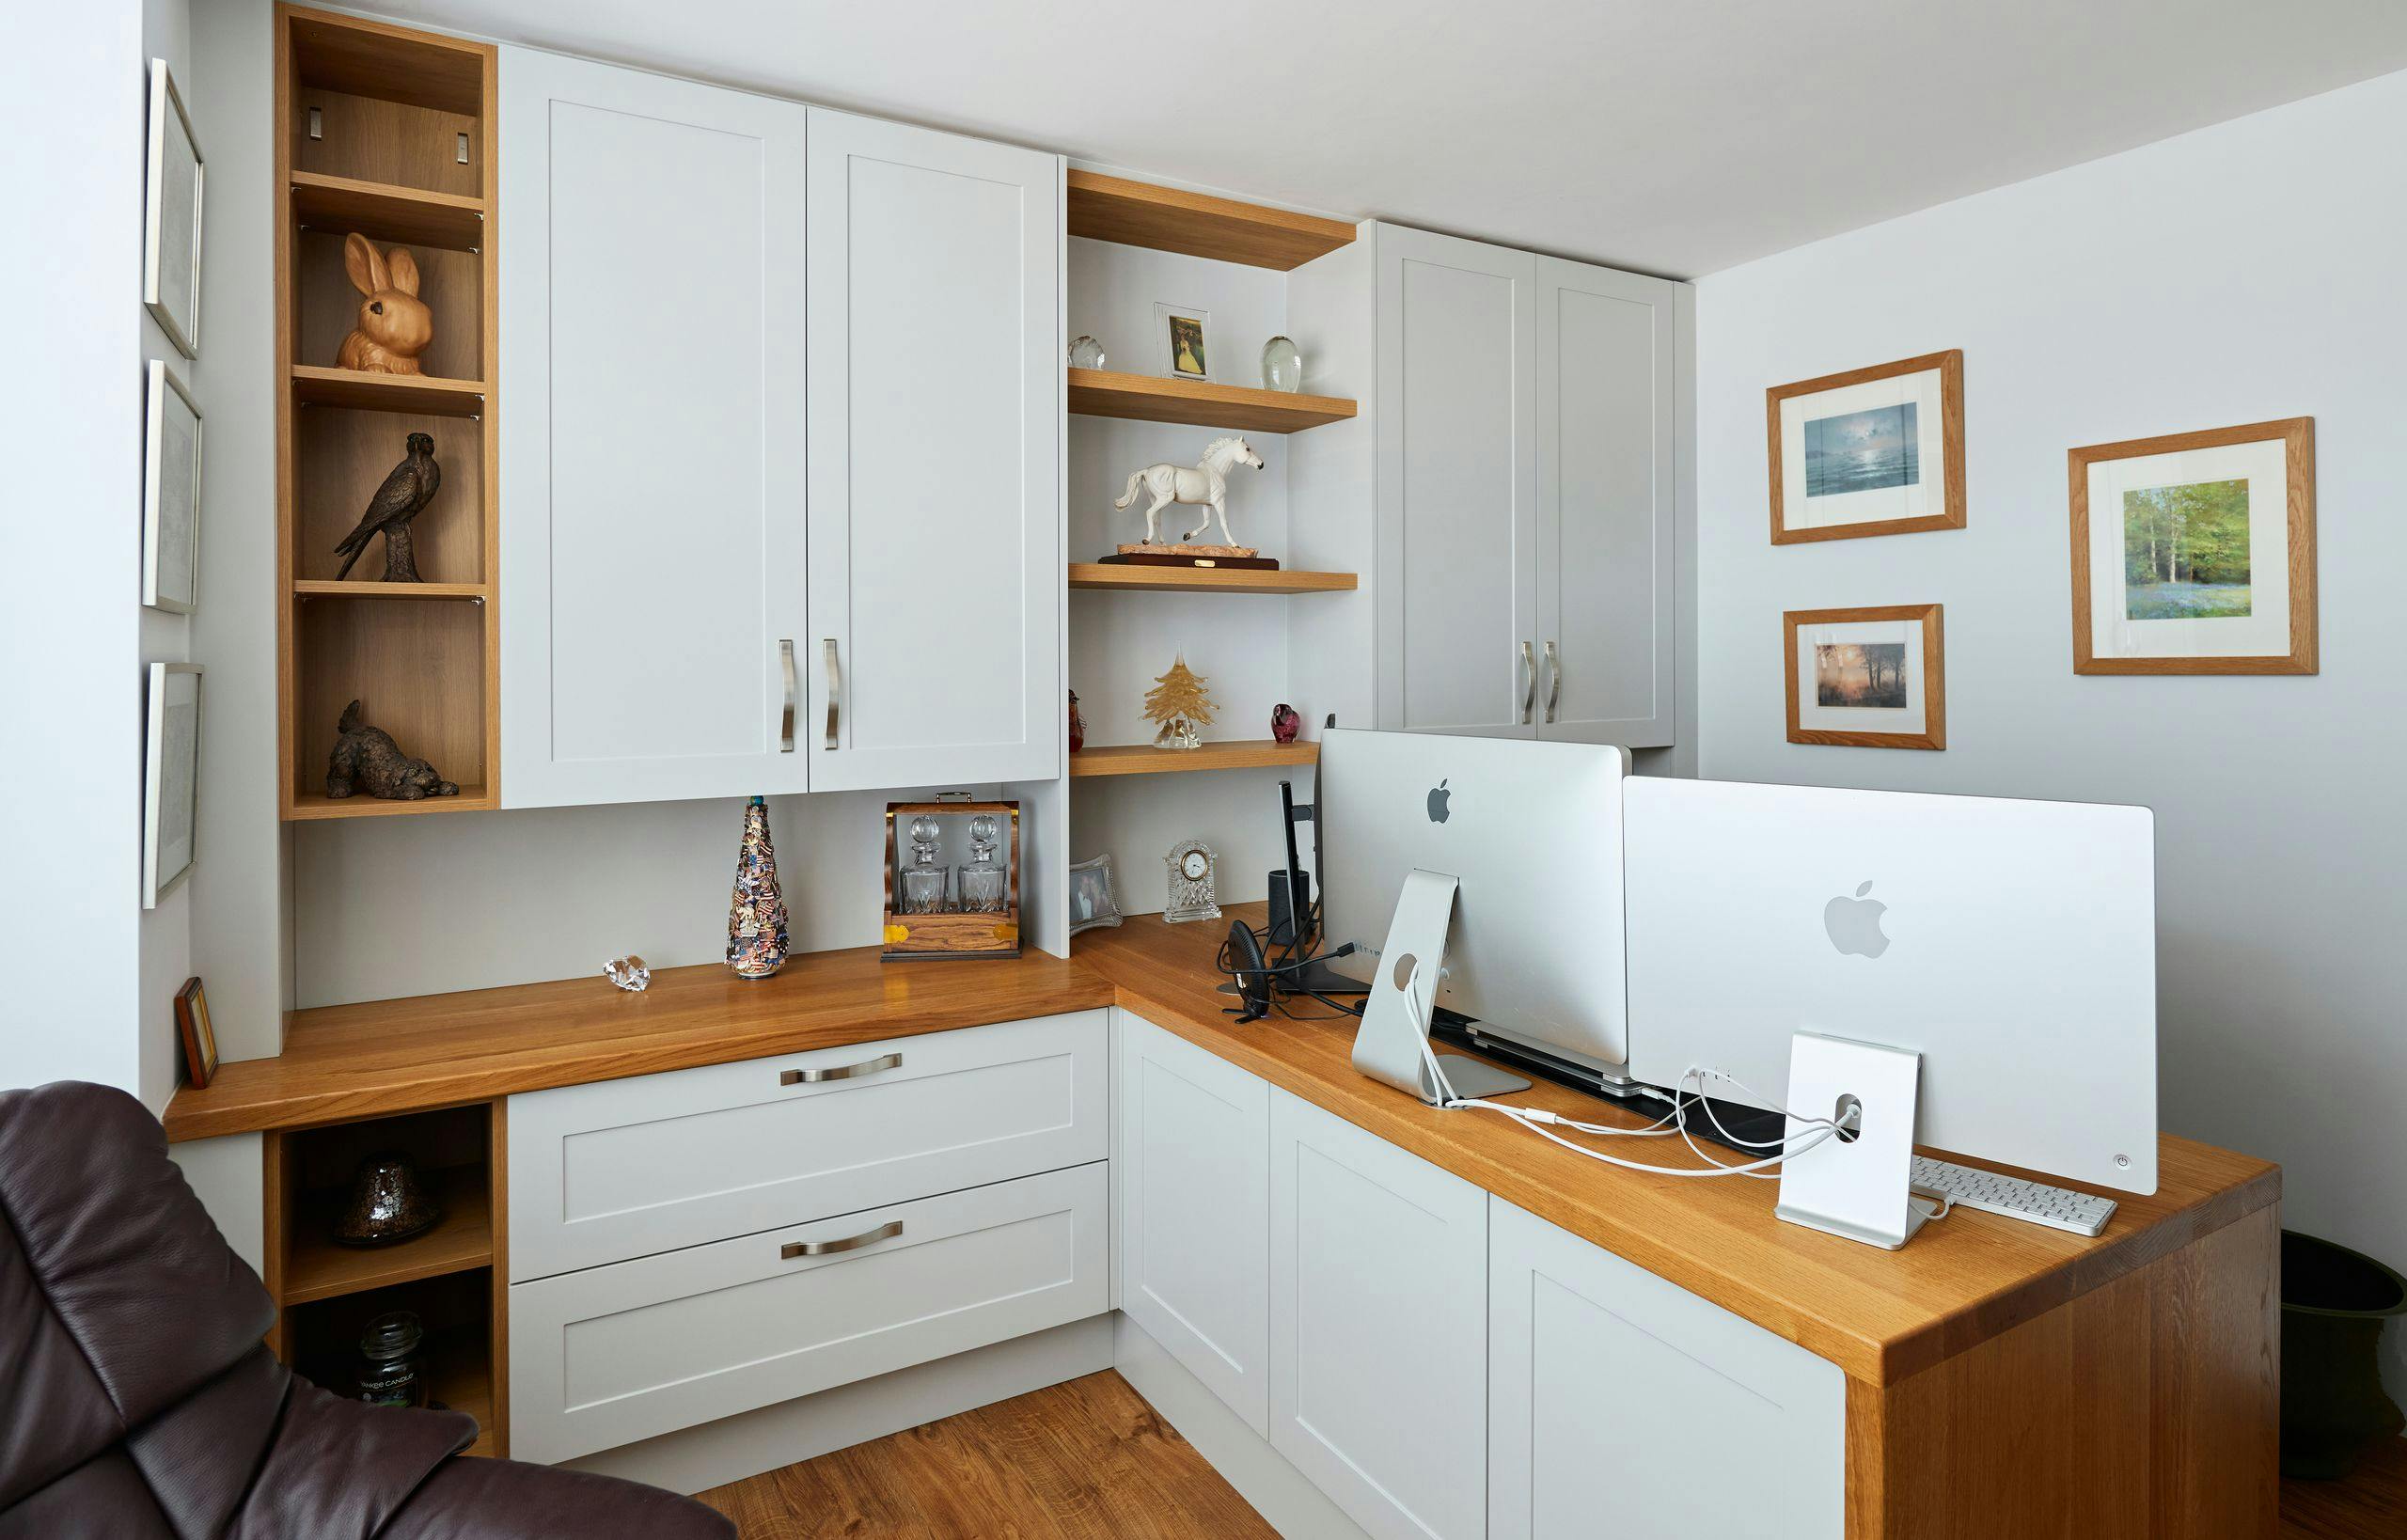 Bespoke fitted home office furniture with oak tops and painted shaker doors